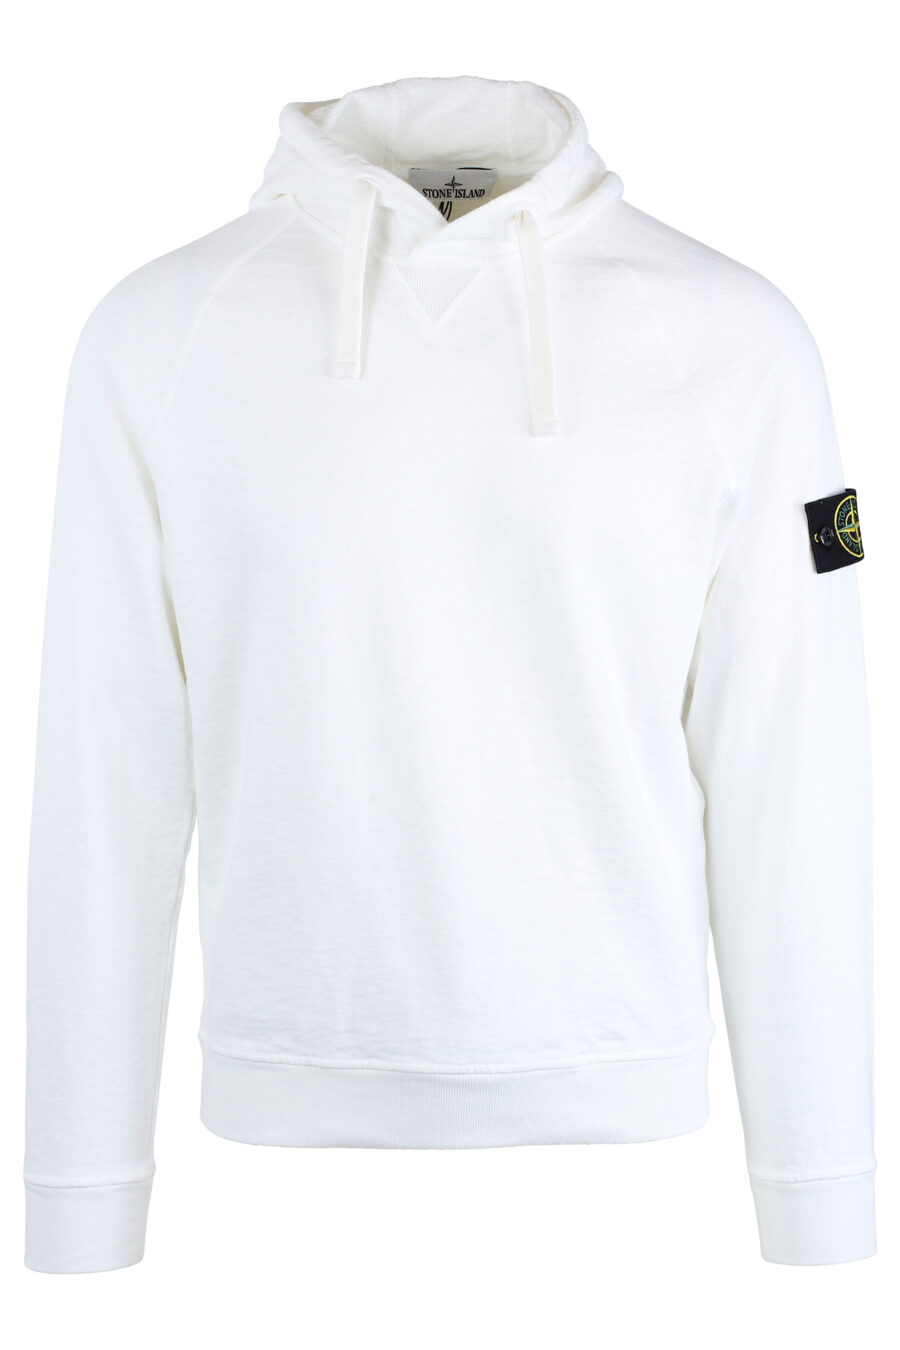 White sweatshirt with hood and patch - IMG 1683